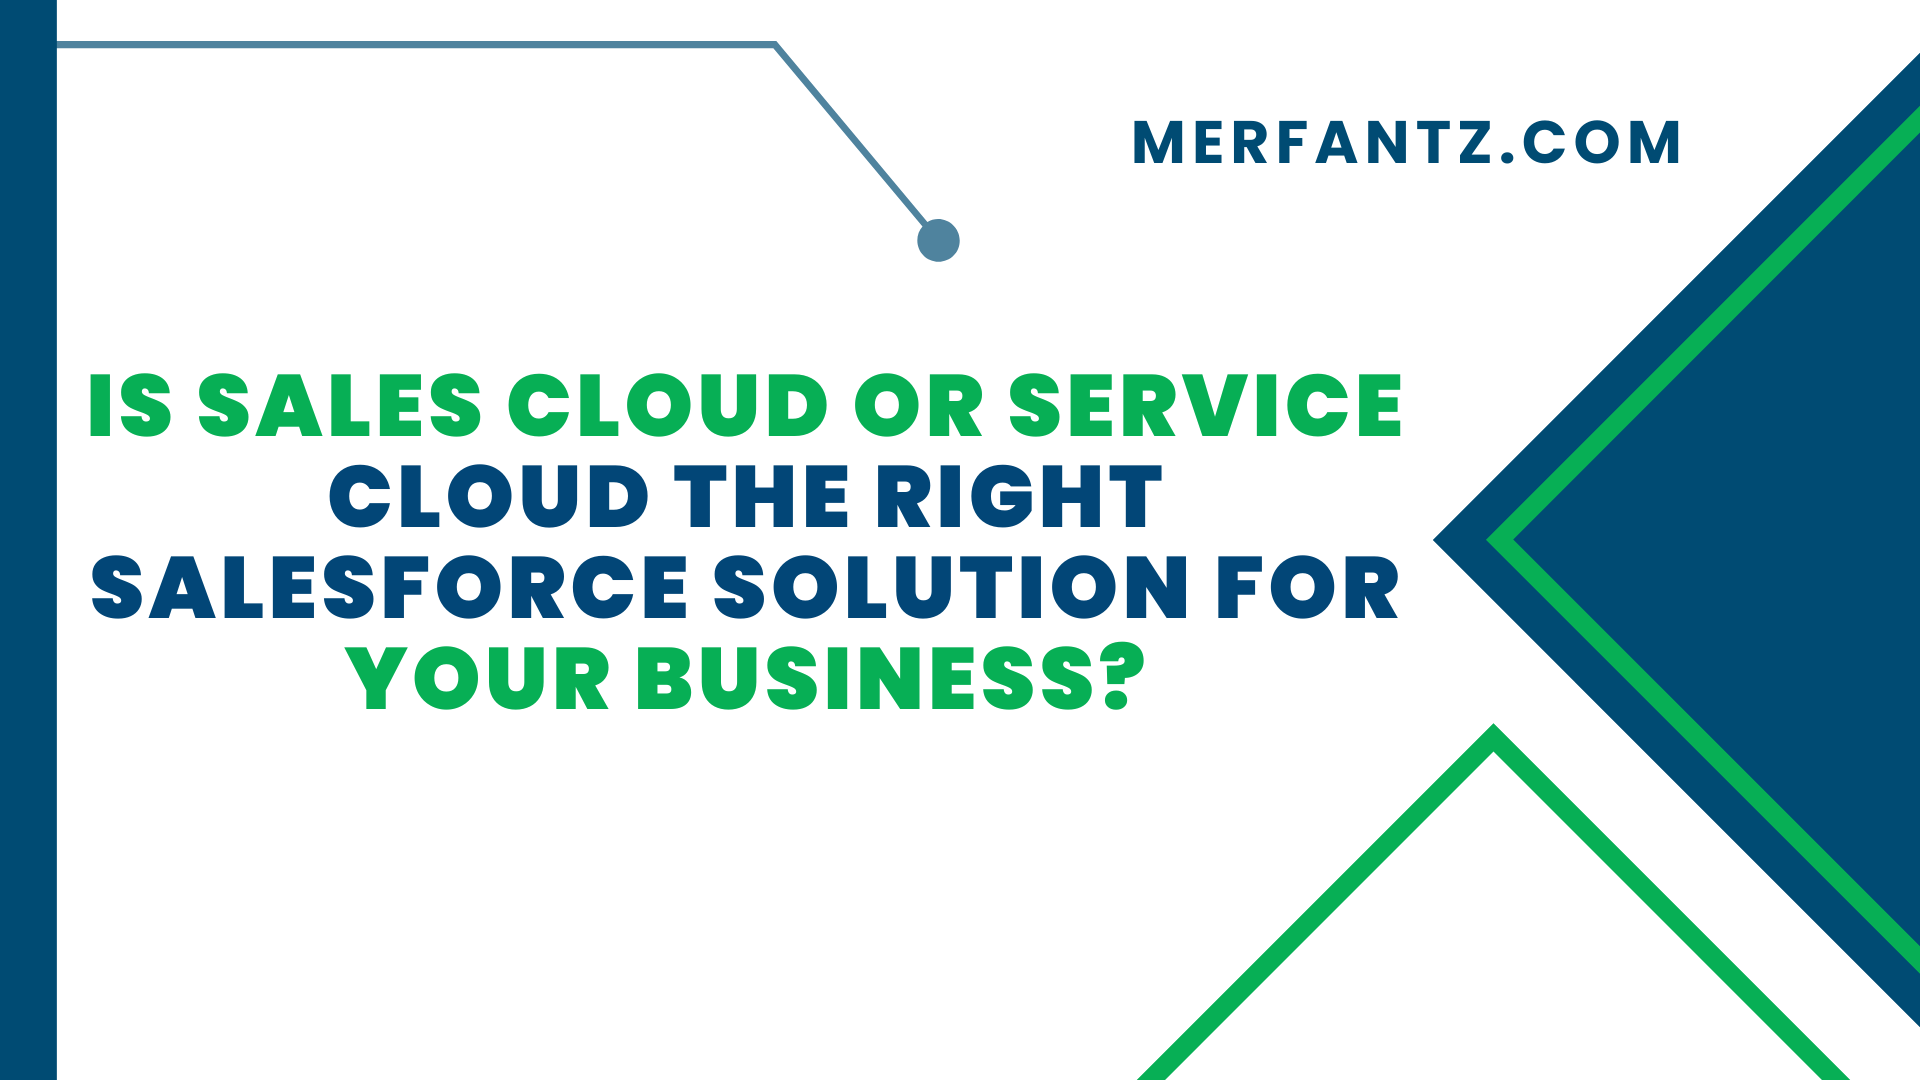 Is Sales Cloud or Service Cloud the Right Salesforce Solution for Your Business